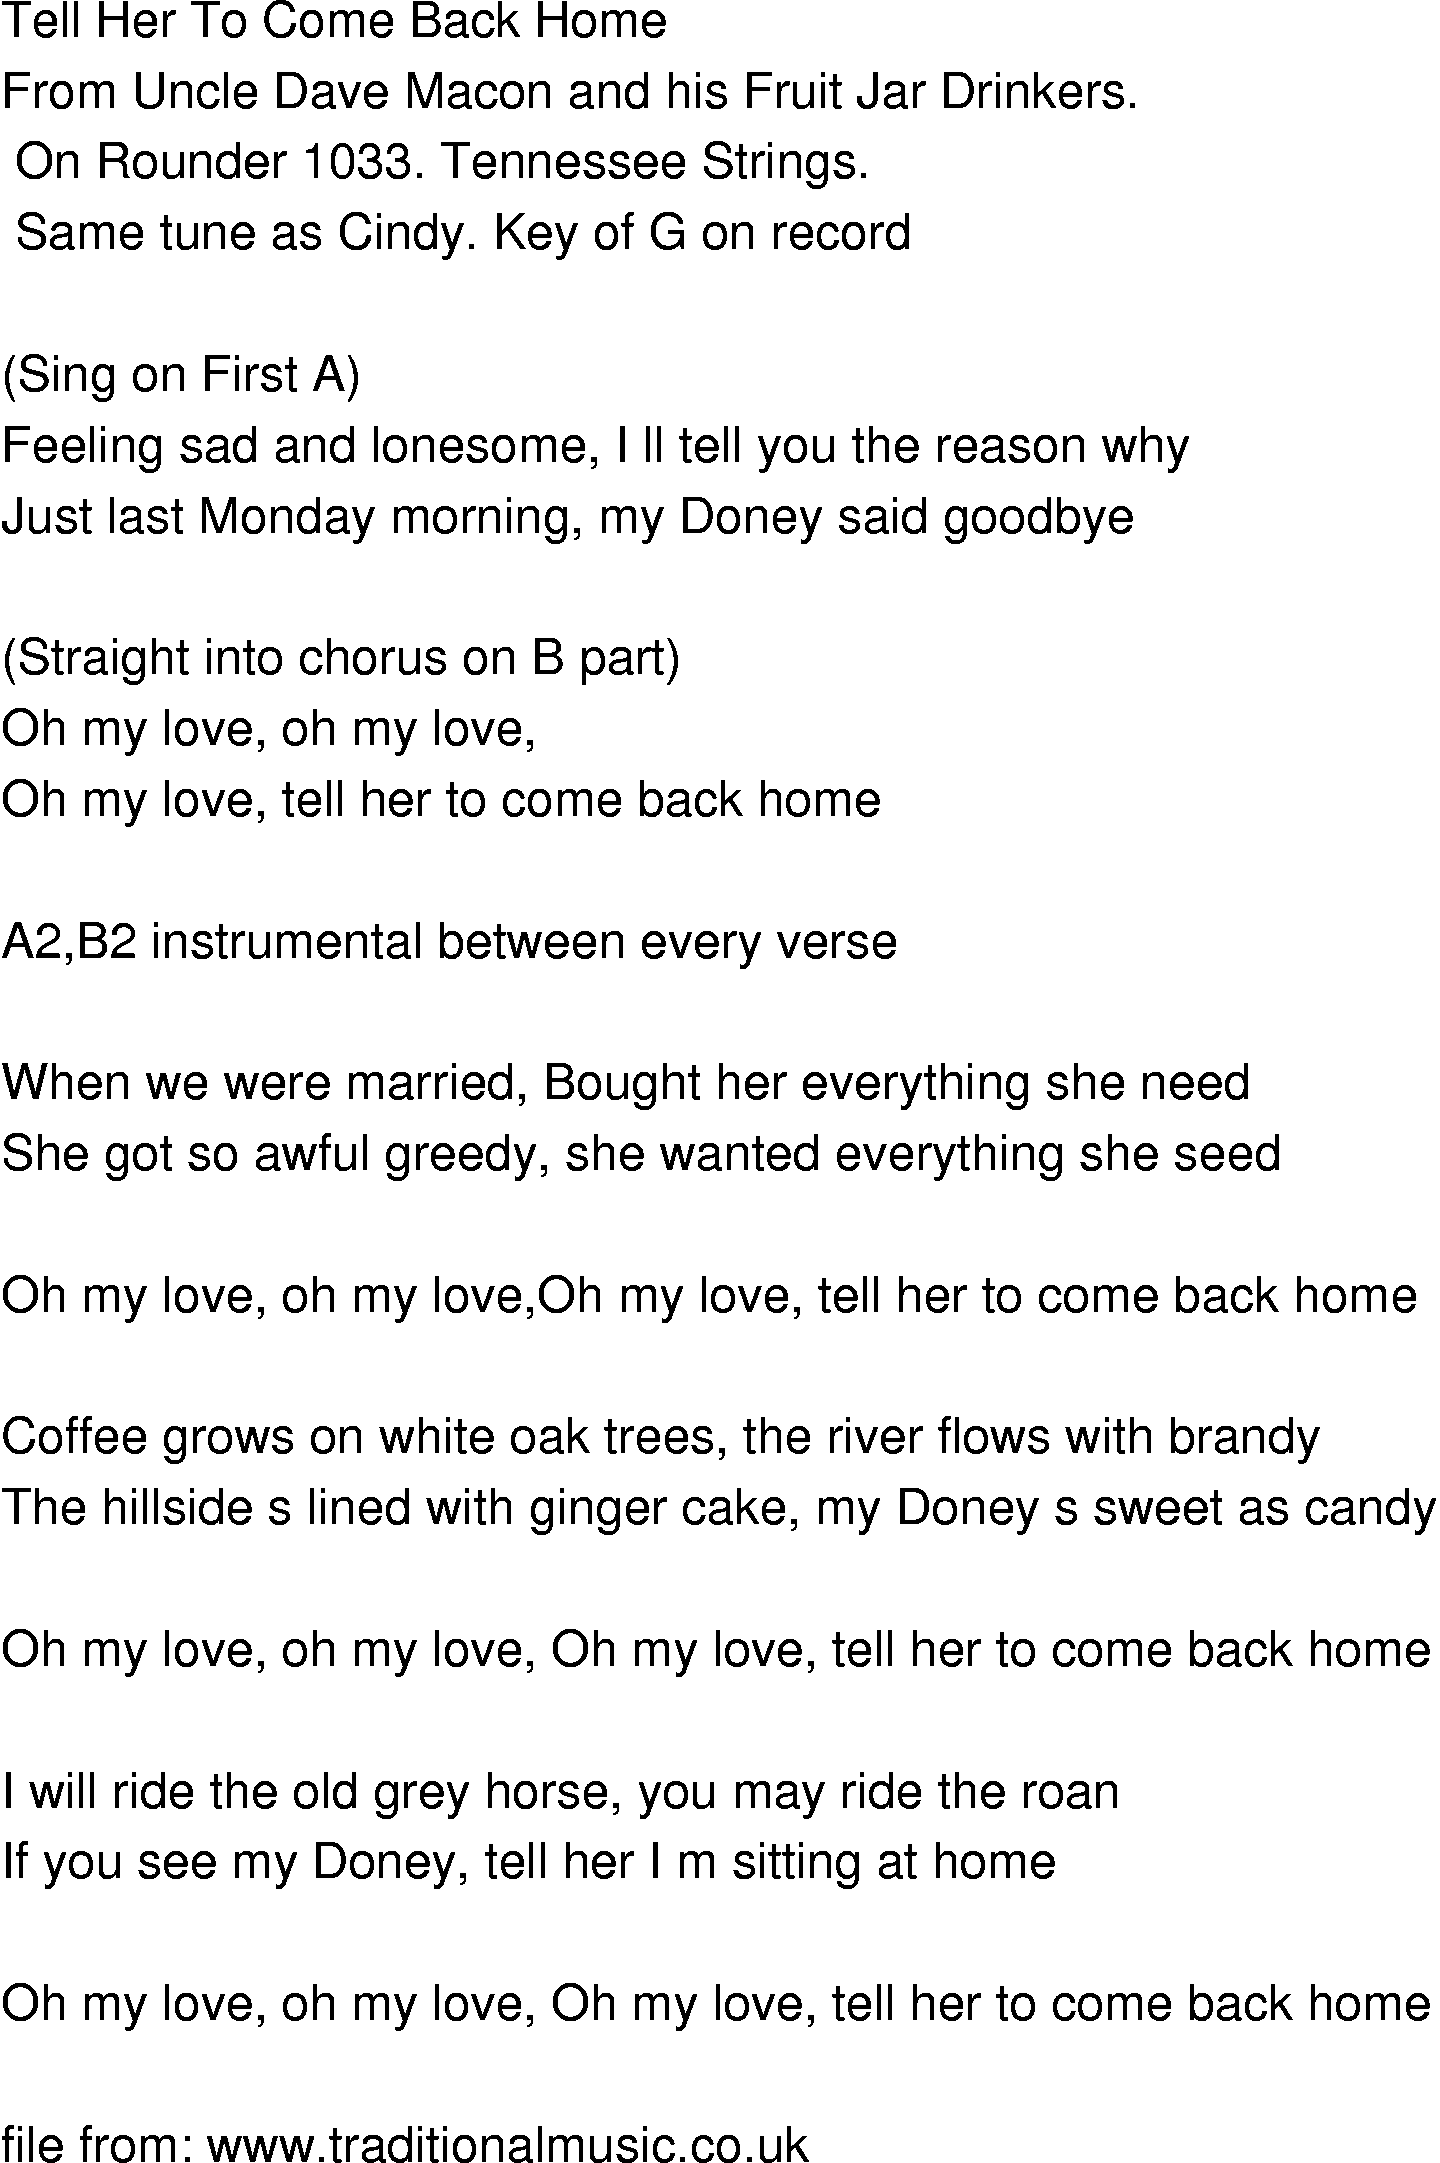 Old-Time (oldtimey) Song Lyrics - tell her to come back home